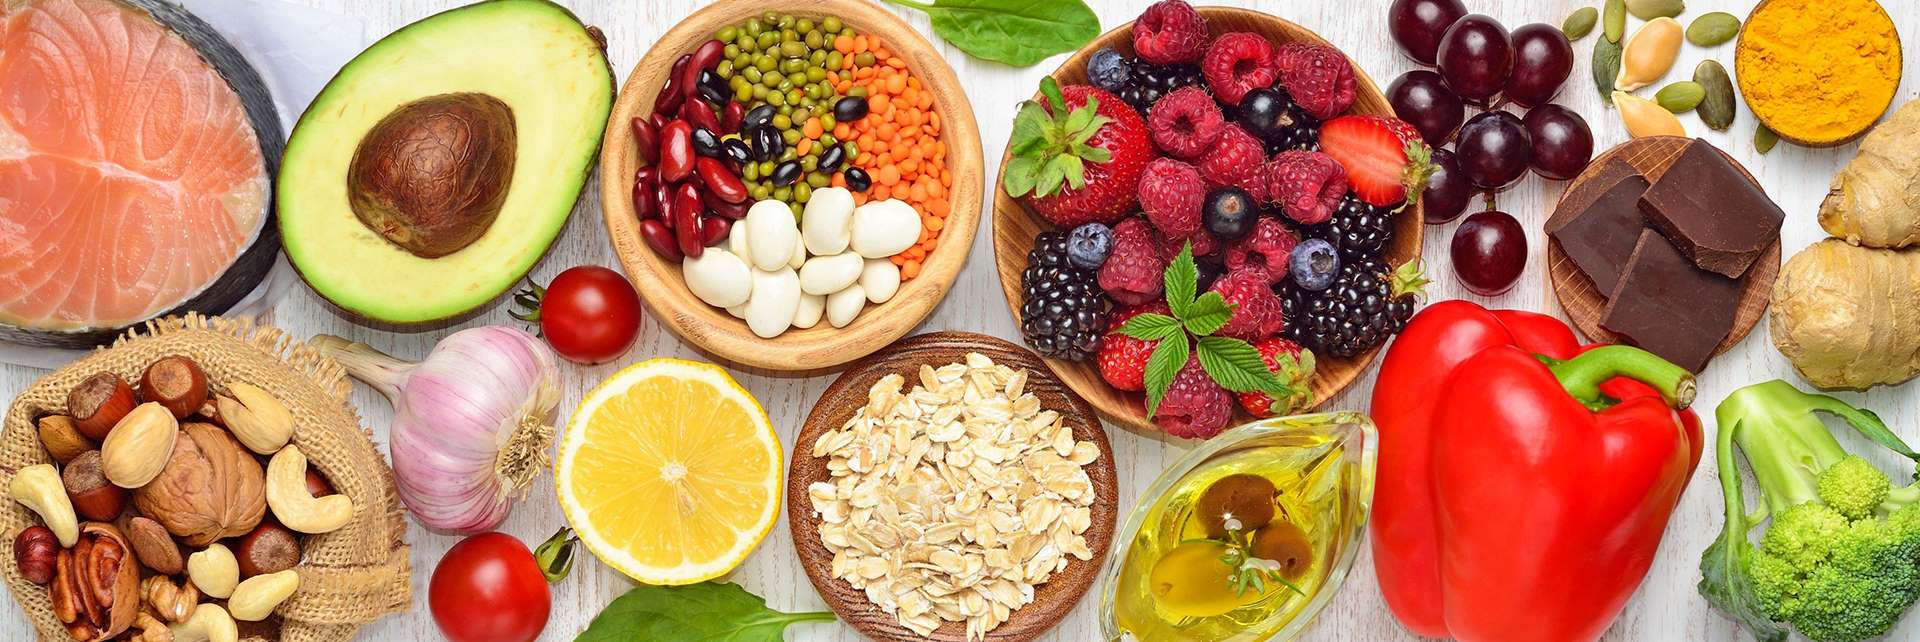 Various bowls and plates of food are pictures: an avocado, beans, legumes, berries, oatmeal, nuts, vegetables